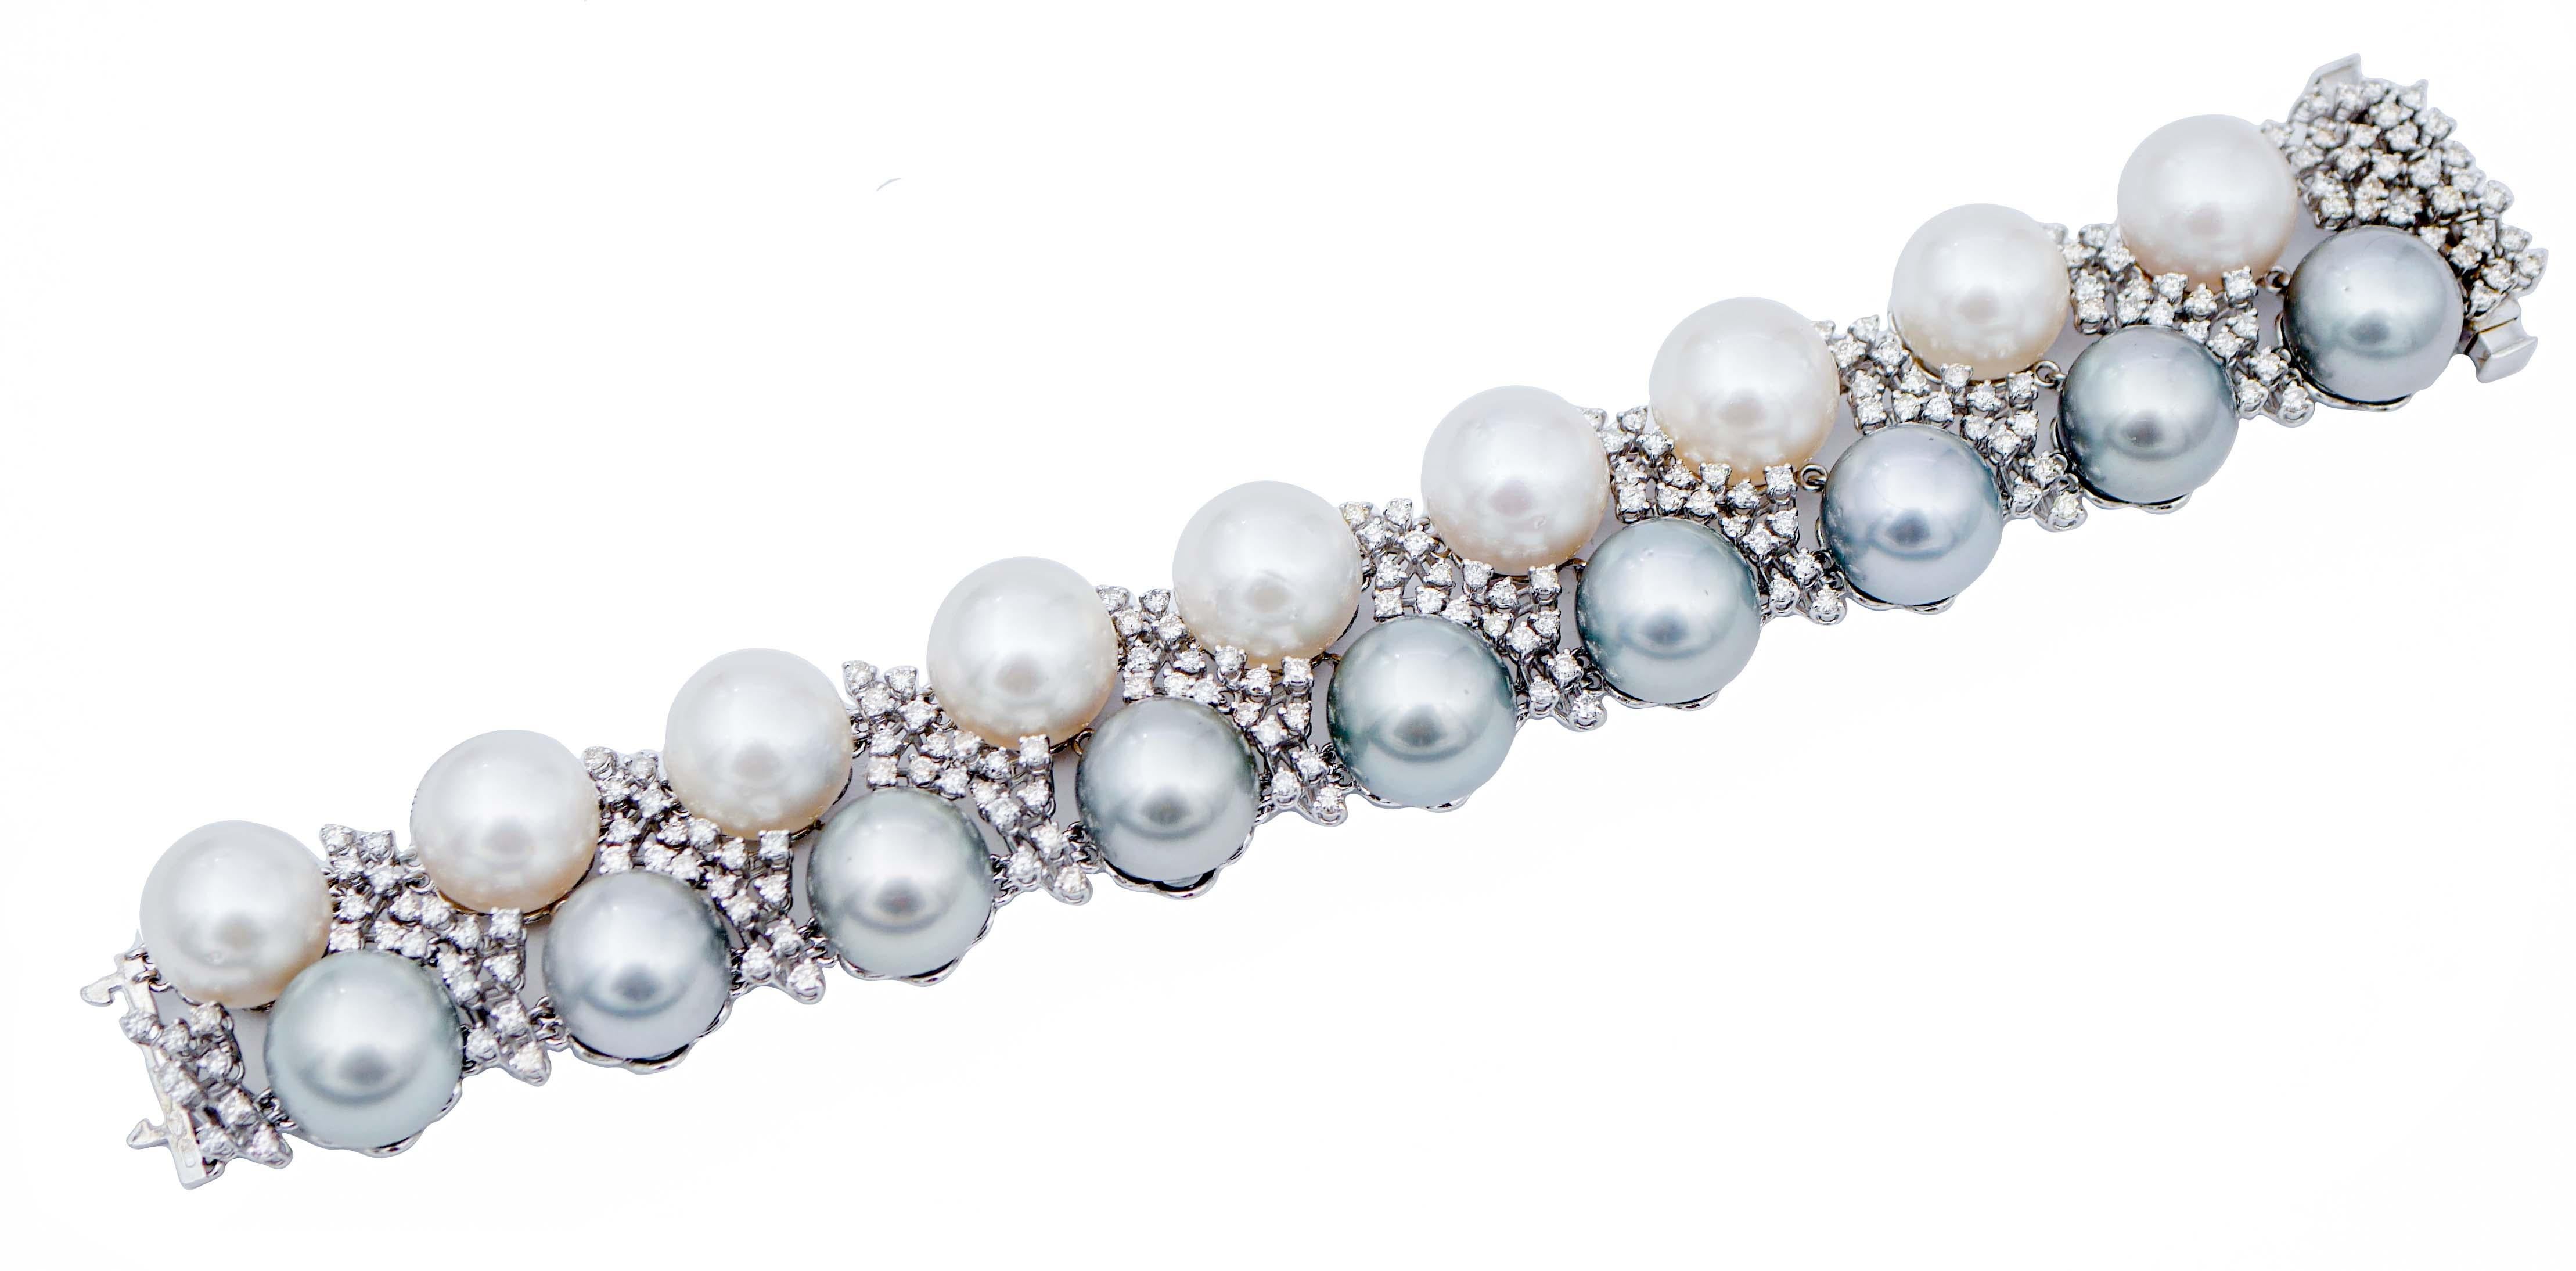 SHIPPING POLICY:
No additional costs will be added to this order.
Shipping costs will be totally covered by the seller (customs duties included).

Amazing retrò bracelet in 14 kt white gold structure mounted with a row of white pearls and a row of